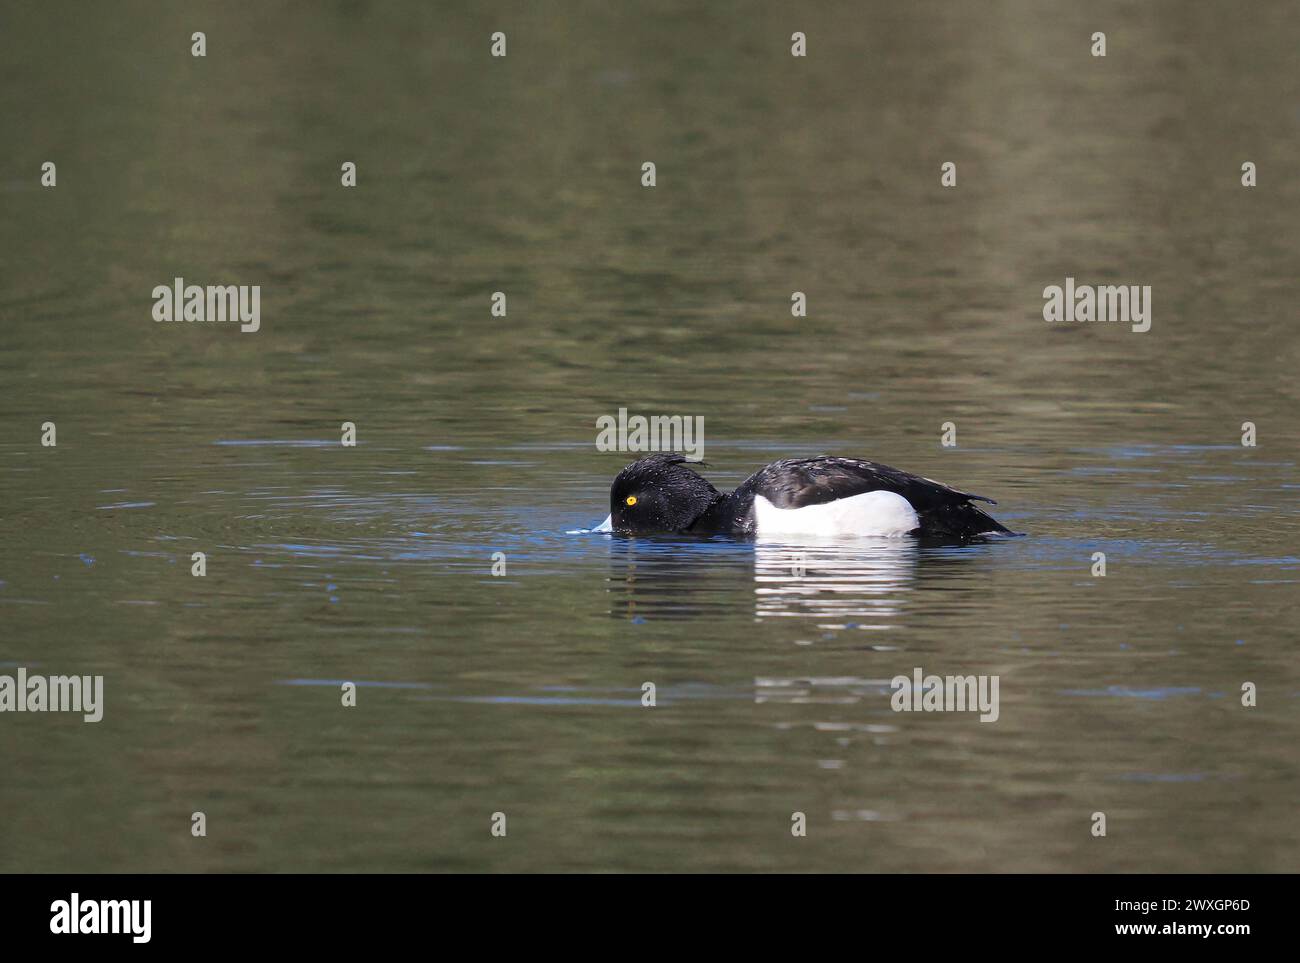 Tufted duck on a lake which they spend the Winter months on prior to migrating to breed. Stock Photo